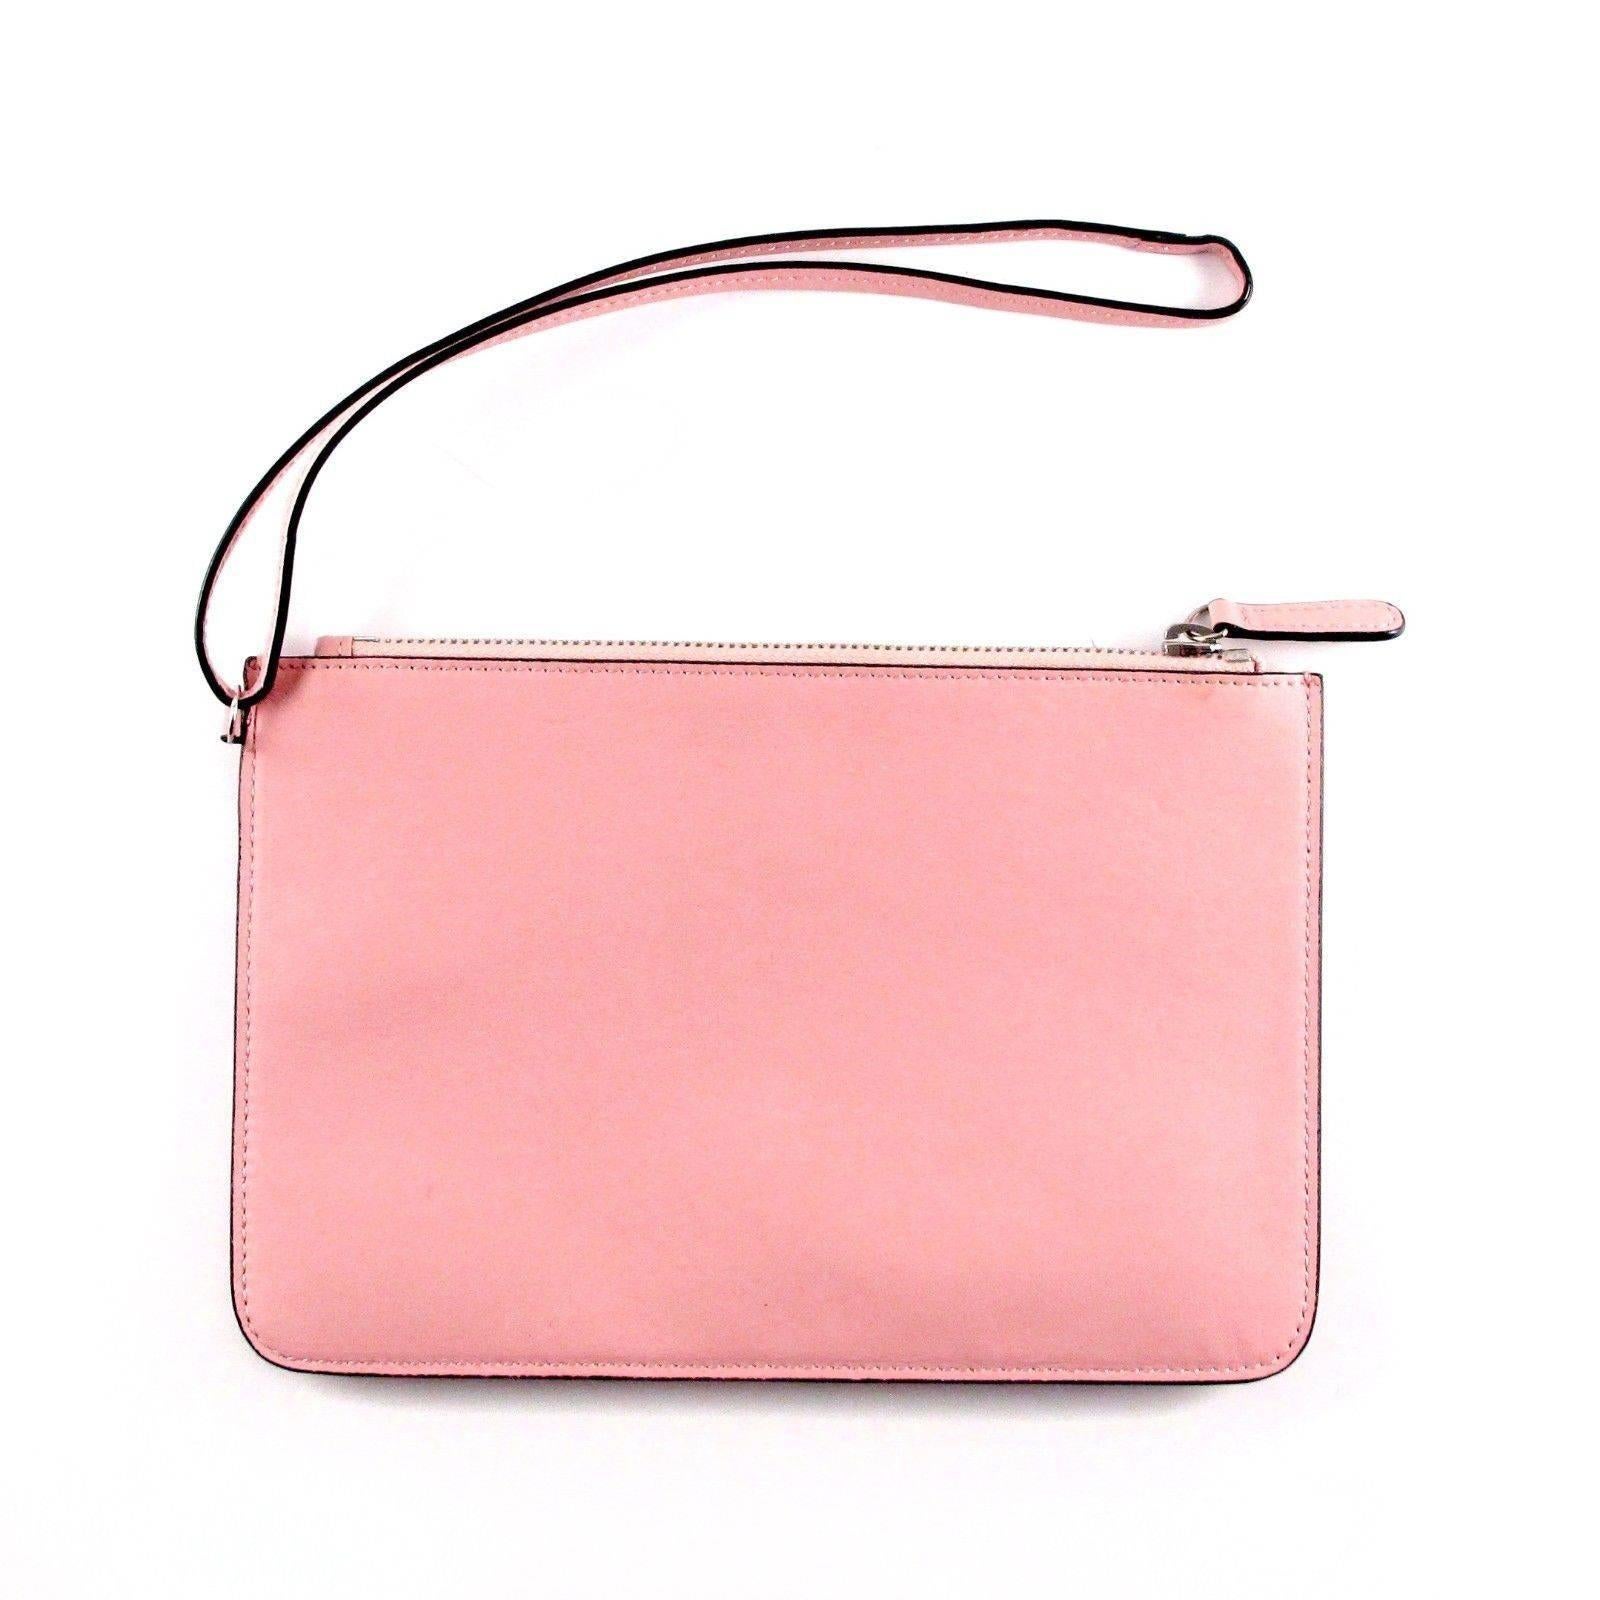 Color: Pink
Material: Leather

------------------------------------------------------------

Details:

- silver tone hardware

- zip top closure

- red lining

- item # AA1288

Condition: Good condition - gently used

small scuff